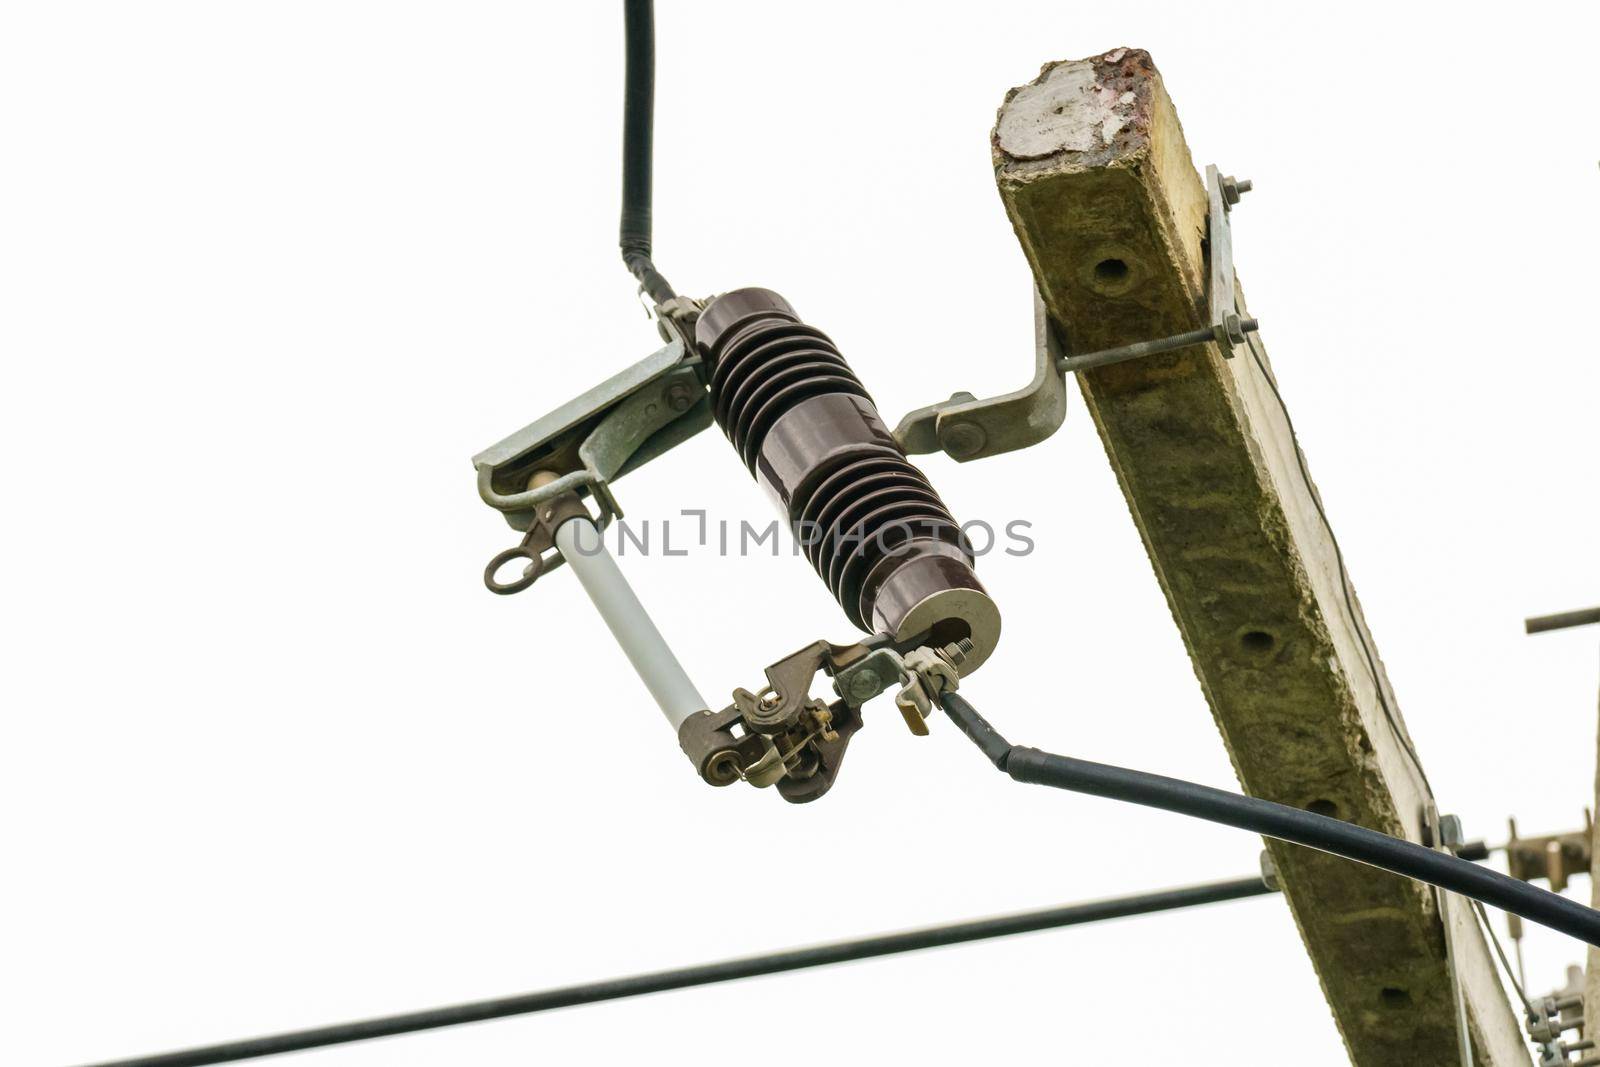 Drop fuse on high-voltage electrical pole supply. by toa55